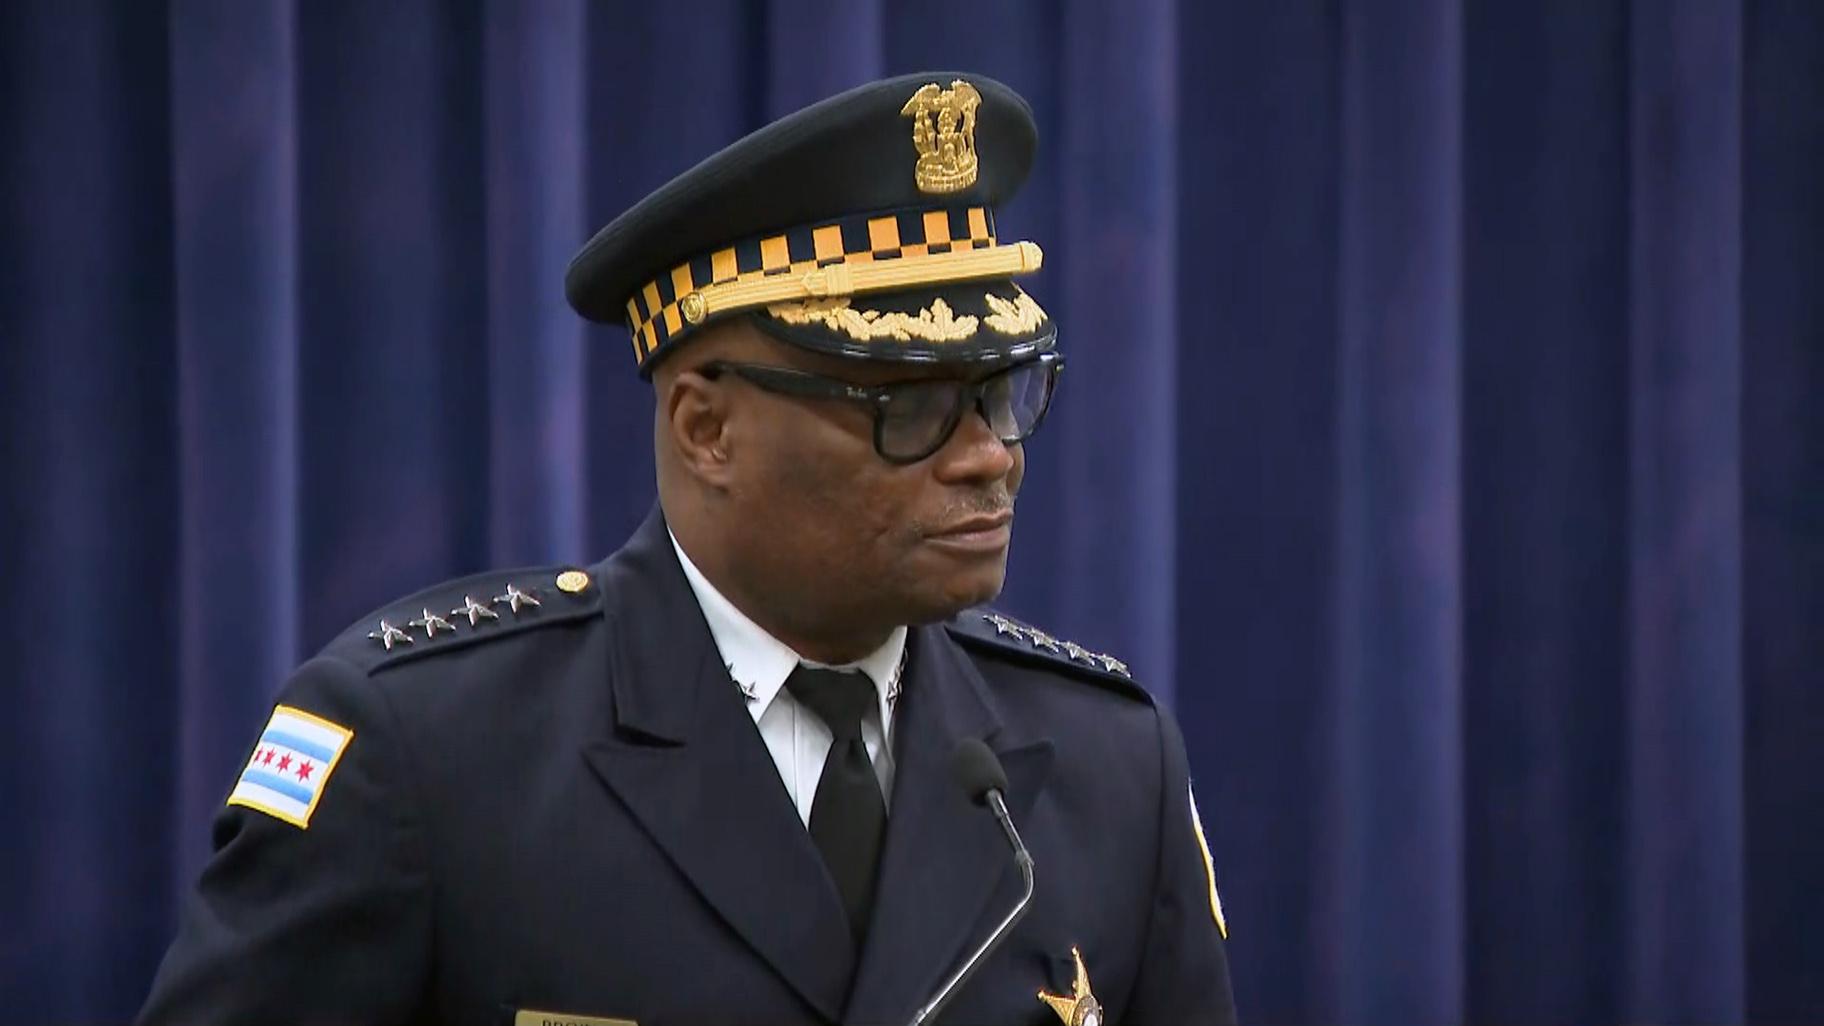 The Chicago Police Department is under a federal consent decree and Supt. Brown says there are multiple things happening consecutively, April 28, 2021. (WTTW News)